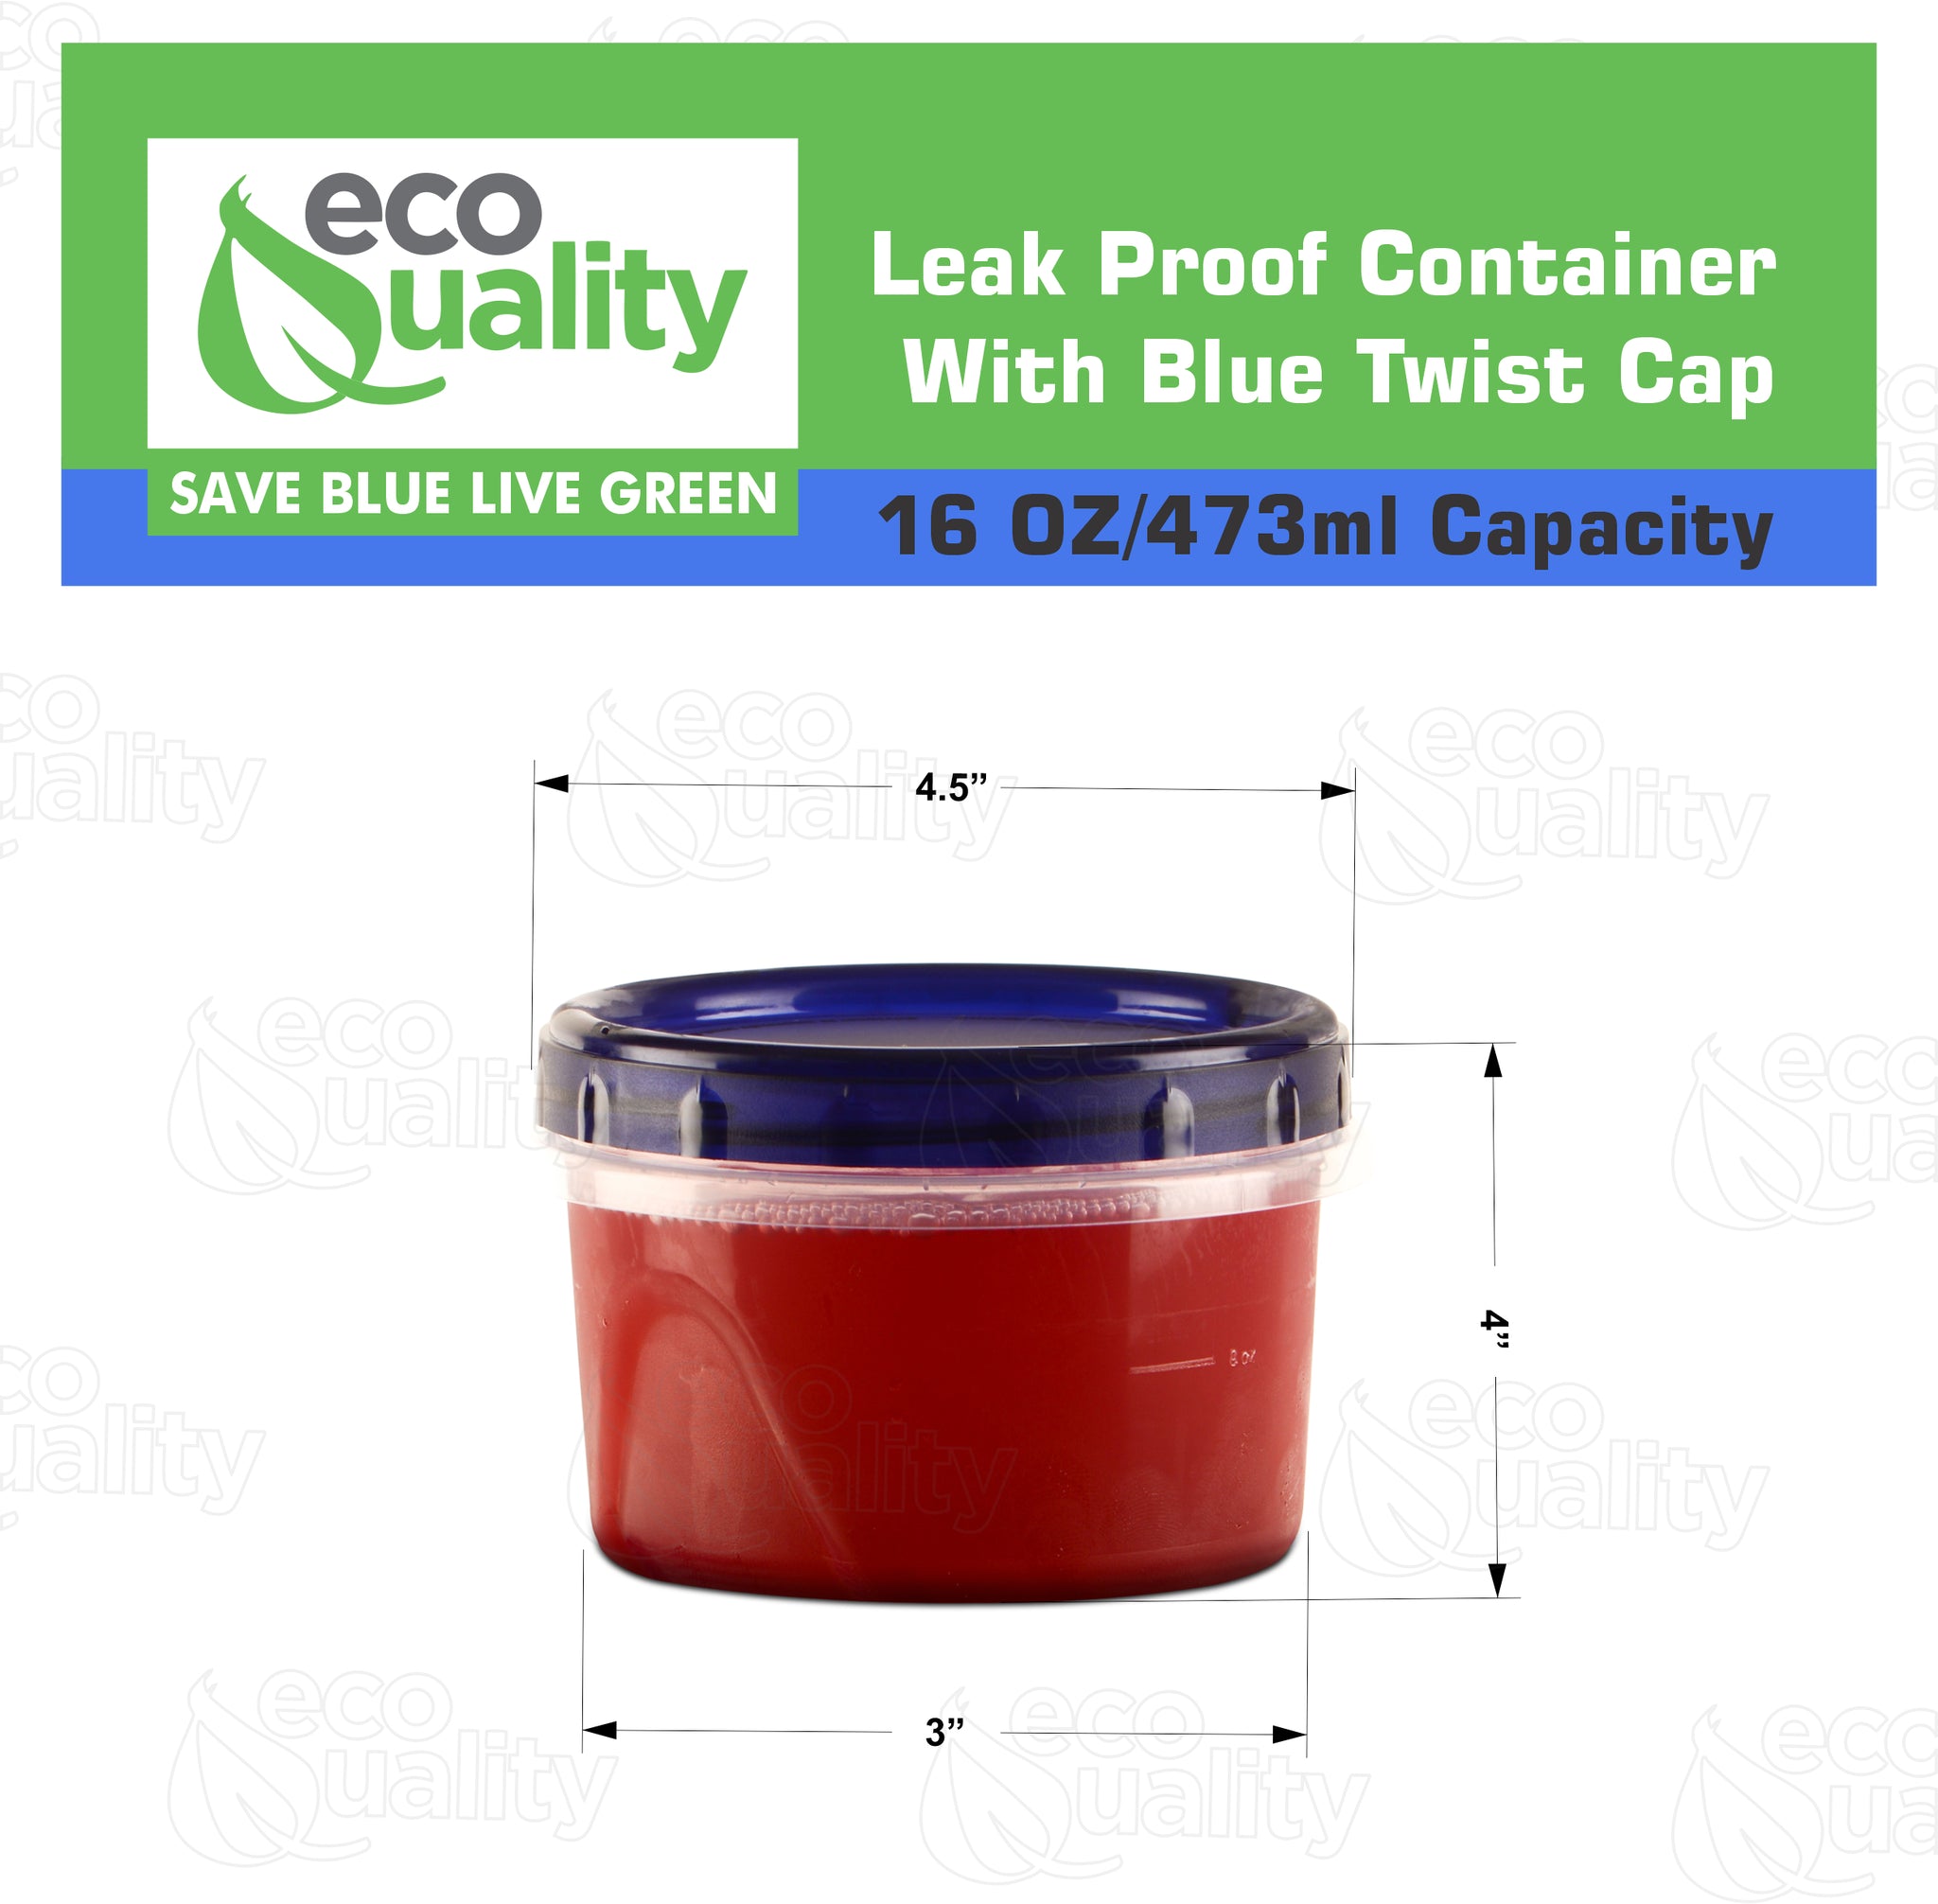 16oz Twist Top Storage Deli Containers BPA-Free, Reusable Airtight Plastic Food Storage Leak Proof Canisters